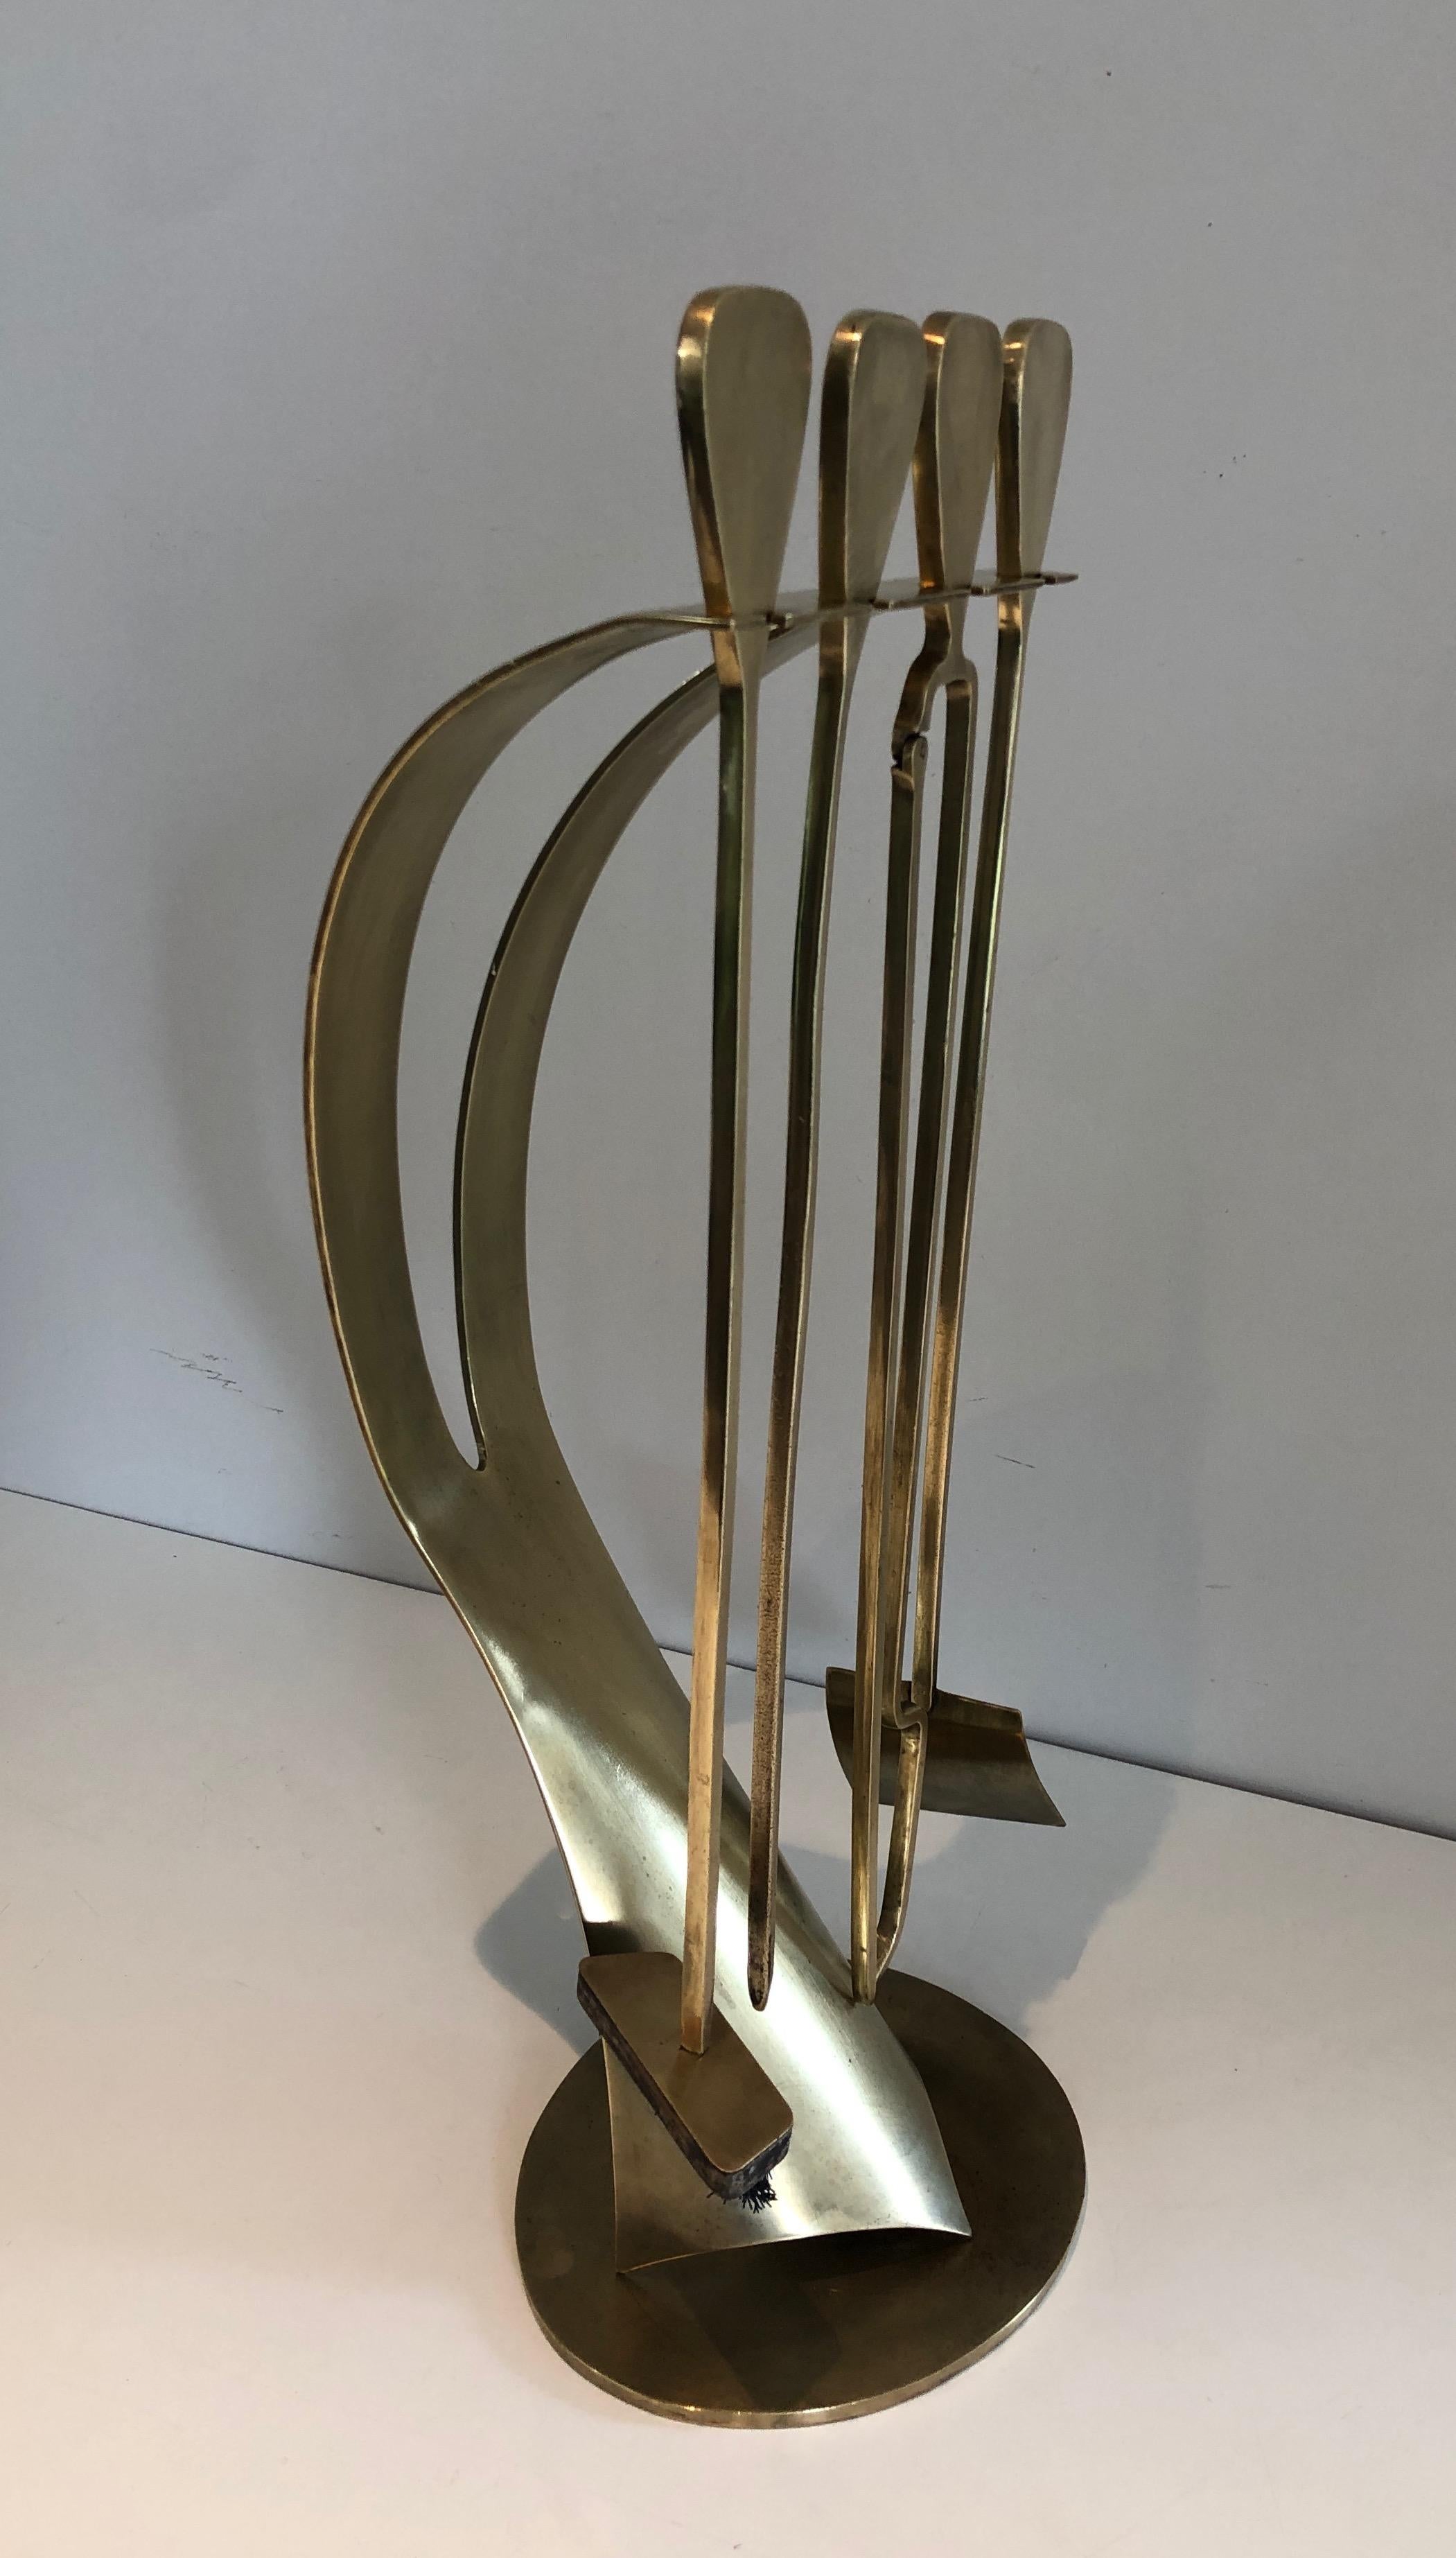 These design fireplace tools on stand are all made of brass. This is a French work, circa 1970.